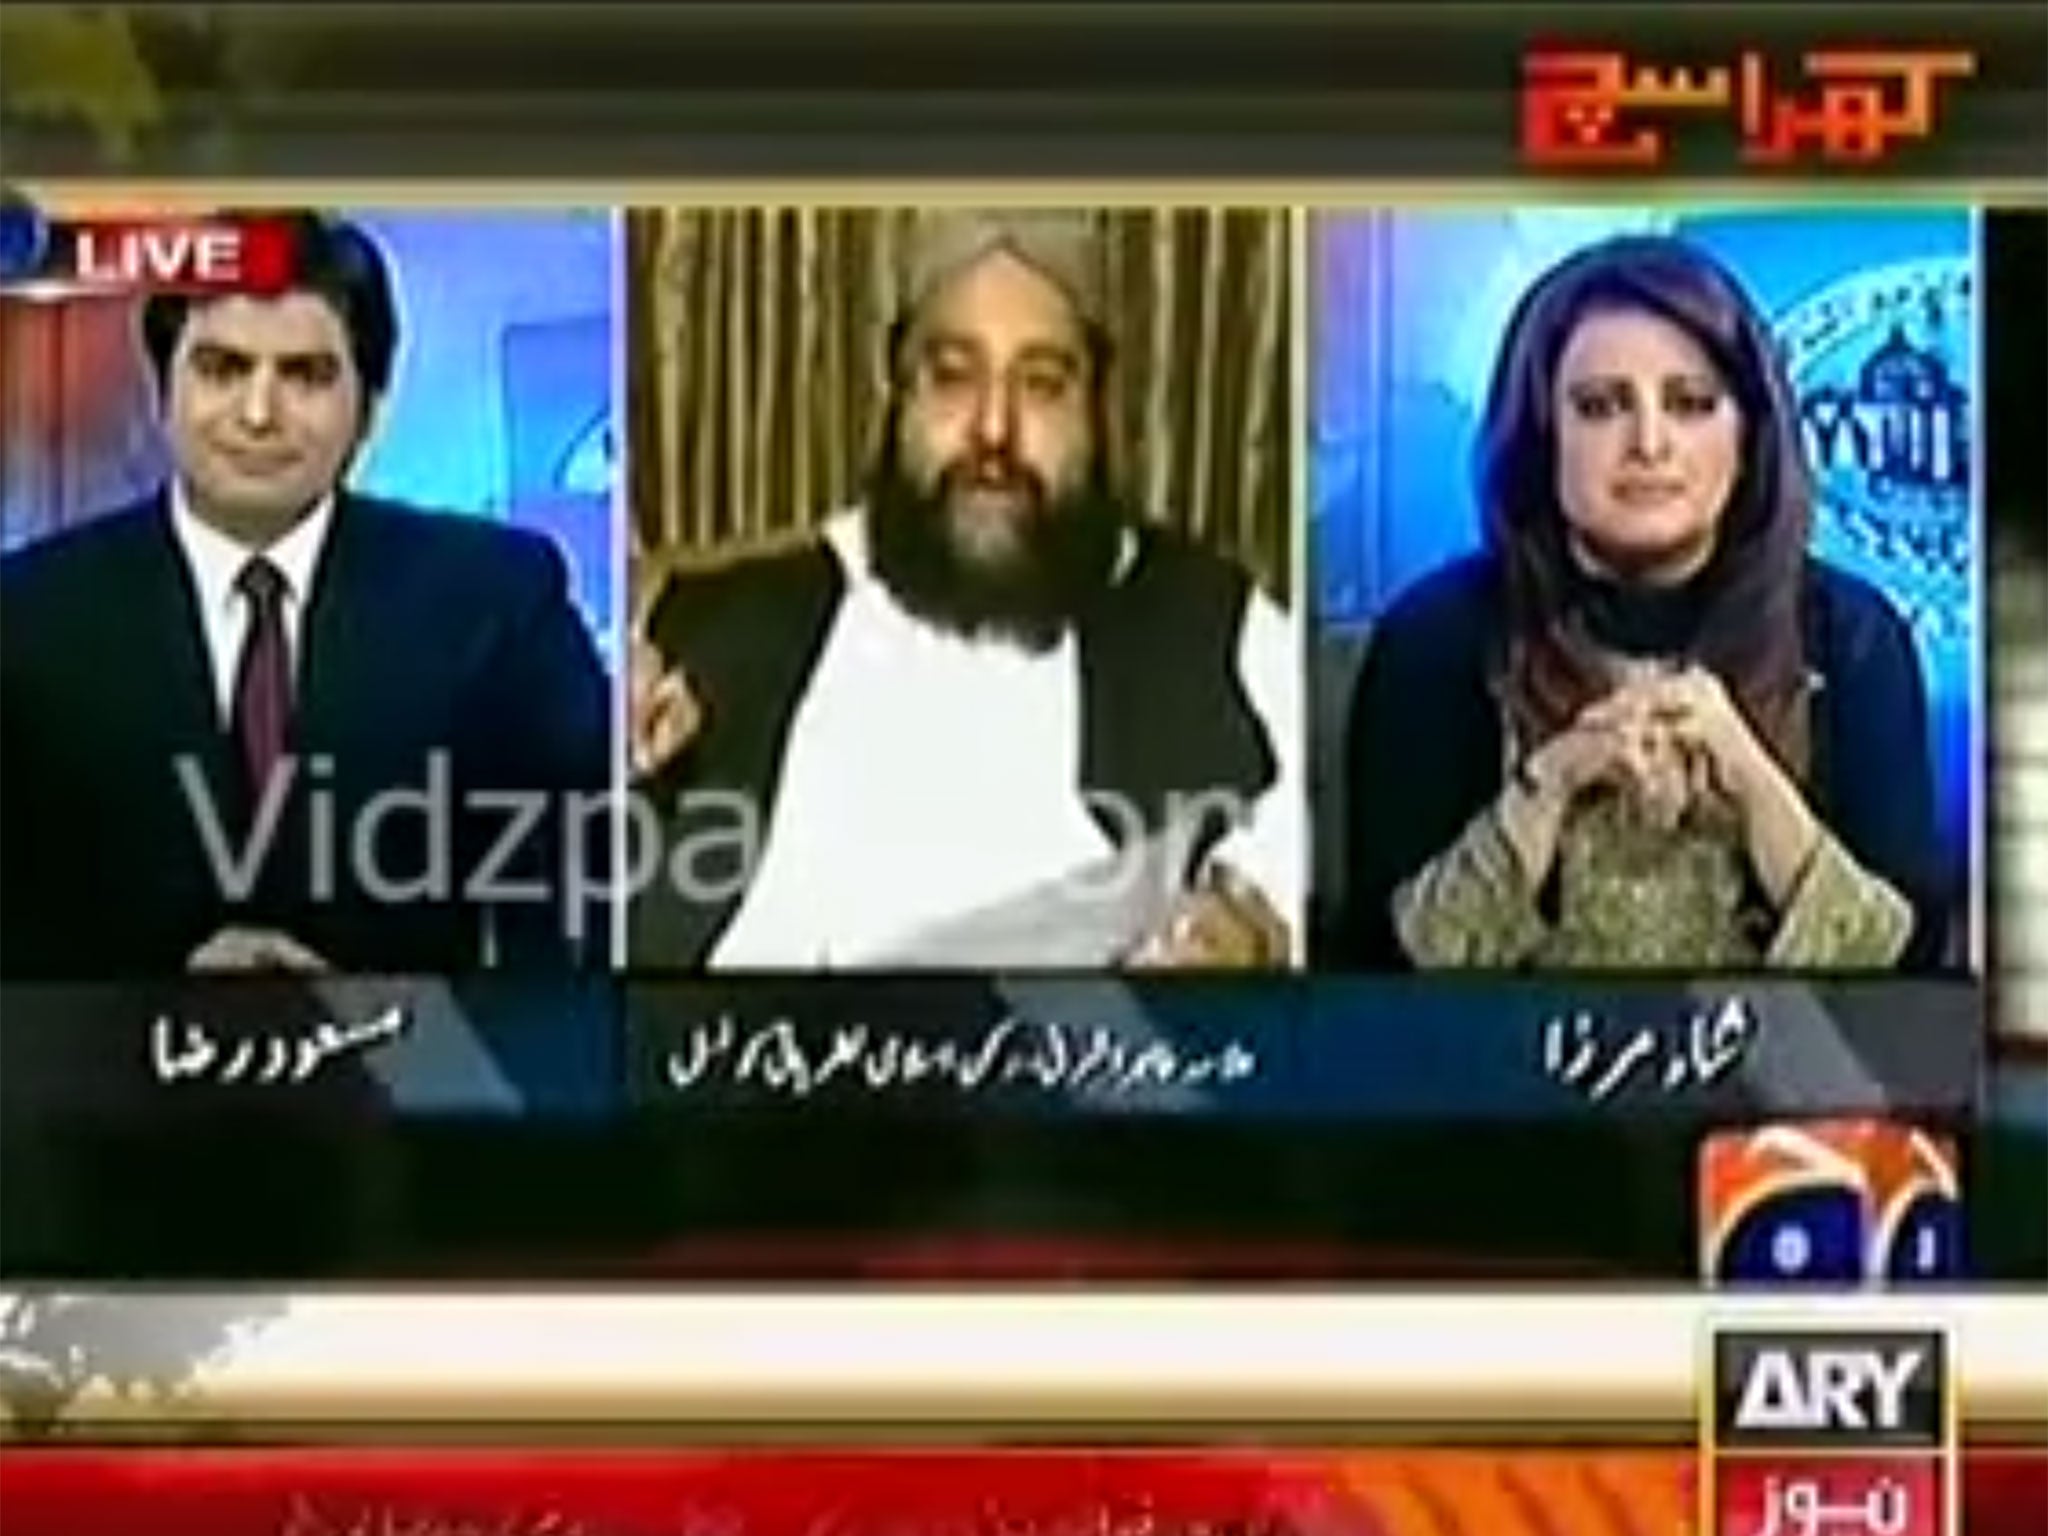 Hafiz Tahir Ashrafi appeared on a late night television talk show where he criticised the actions of former cricketer Imran Khan